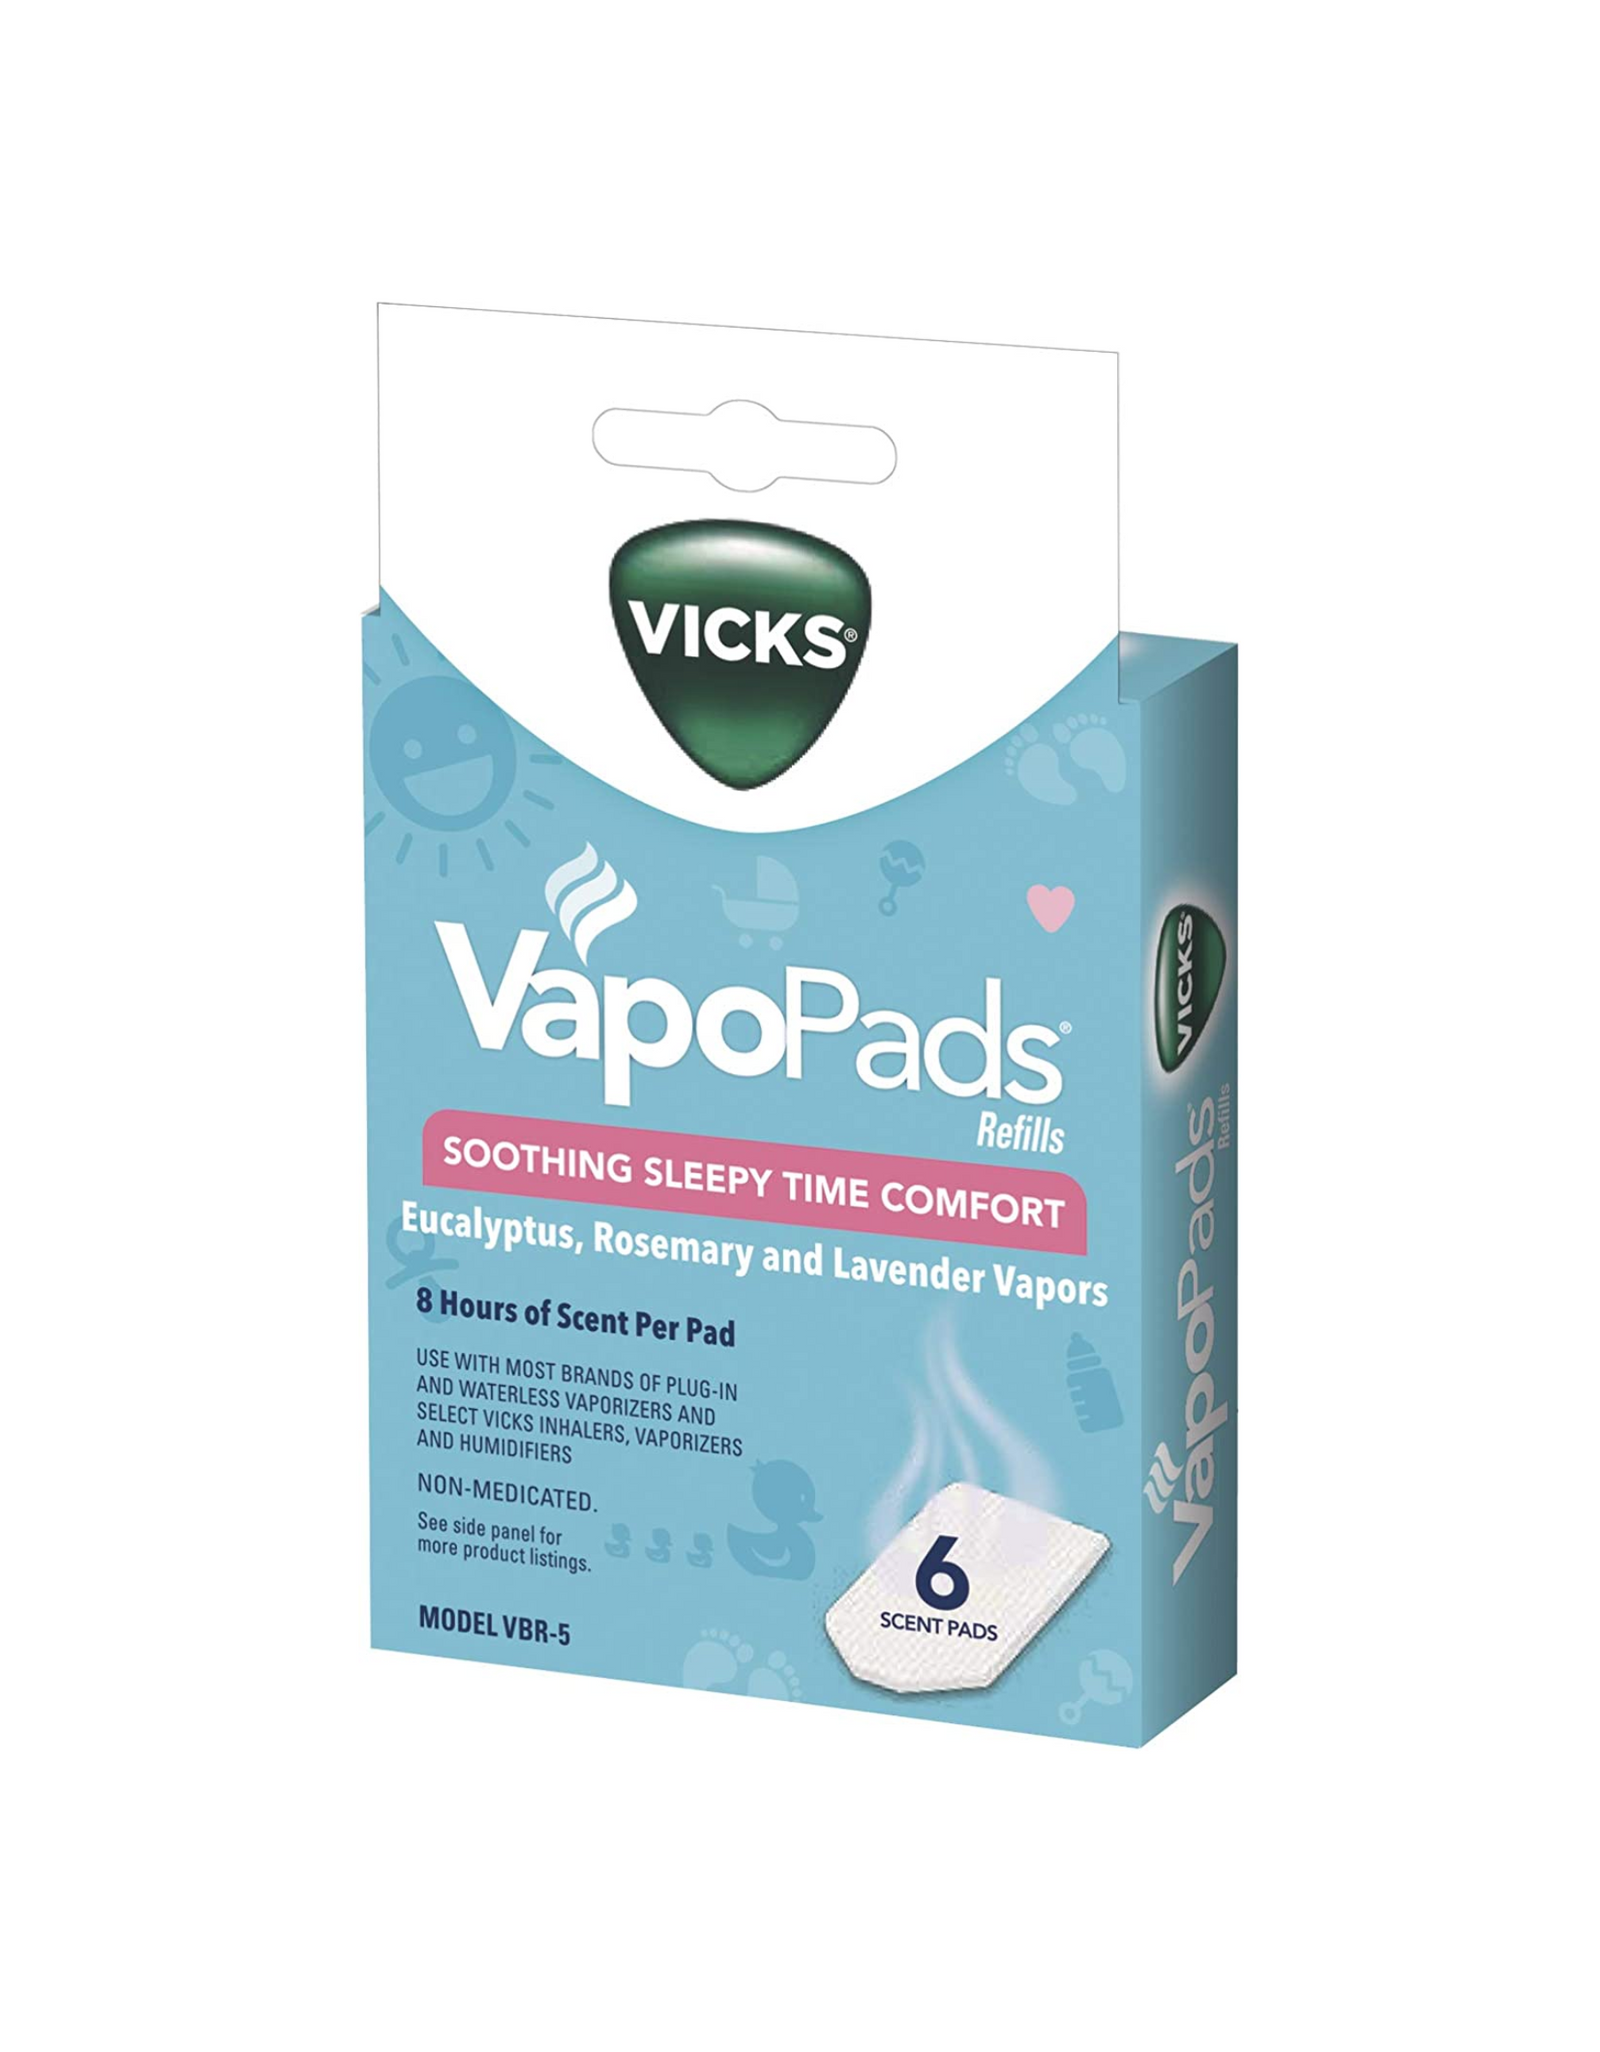 Vicks Sleepytime Waterless Vaporizer Scent Pads Rosemary, Lavender and Eucalyptus Scented Vapor Pad Refills White 6 Ct (Pack of 1)